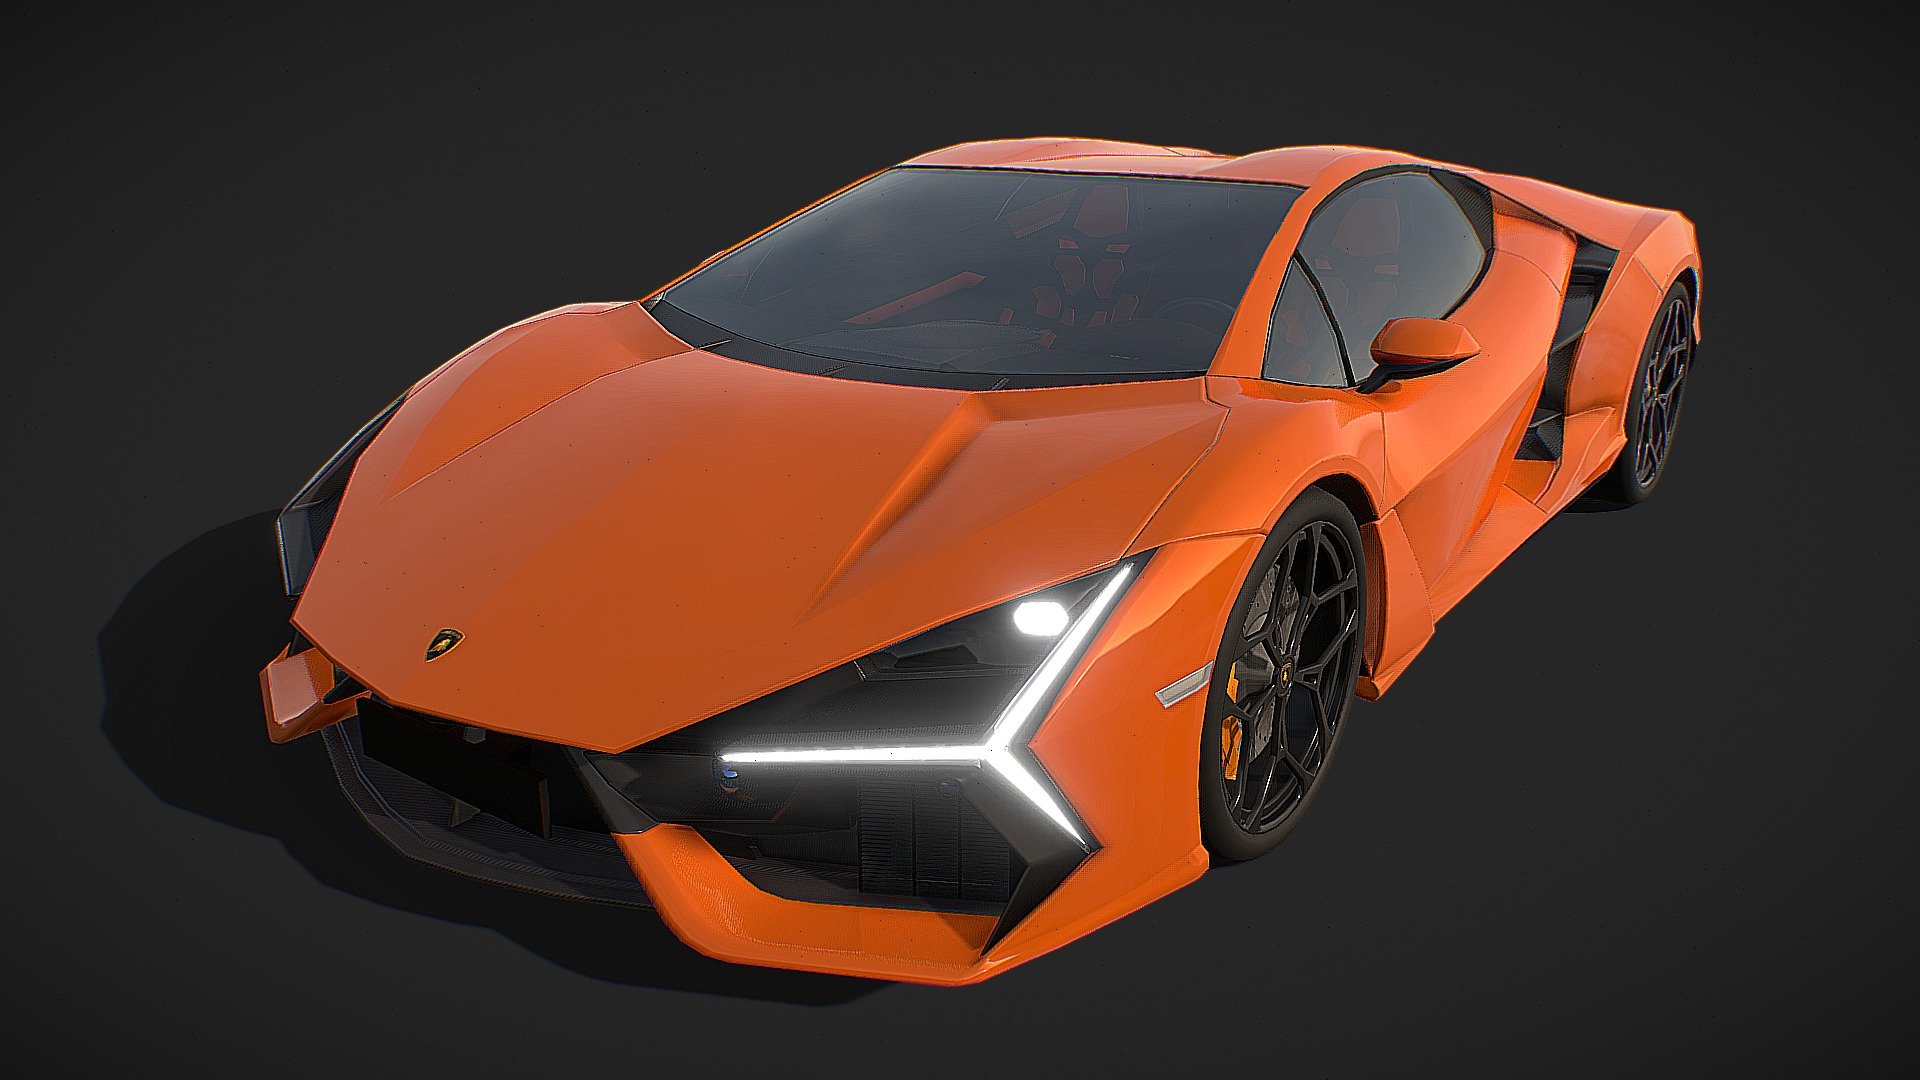 Lamborghini Revuelto

Check out my Youtube channel for my future rigging tutorial: https://www.youtube.com/@ALIEEEN_3D



You can use this model in your projects, commercial or personal. Attribution is not required but is greatly appreciated.

You can’t sell this model alone (or in a pack) 3d model